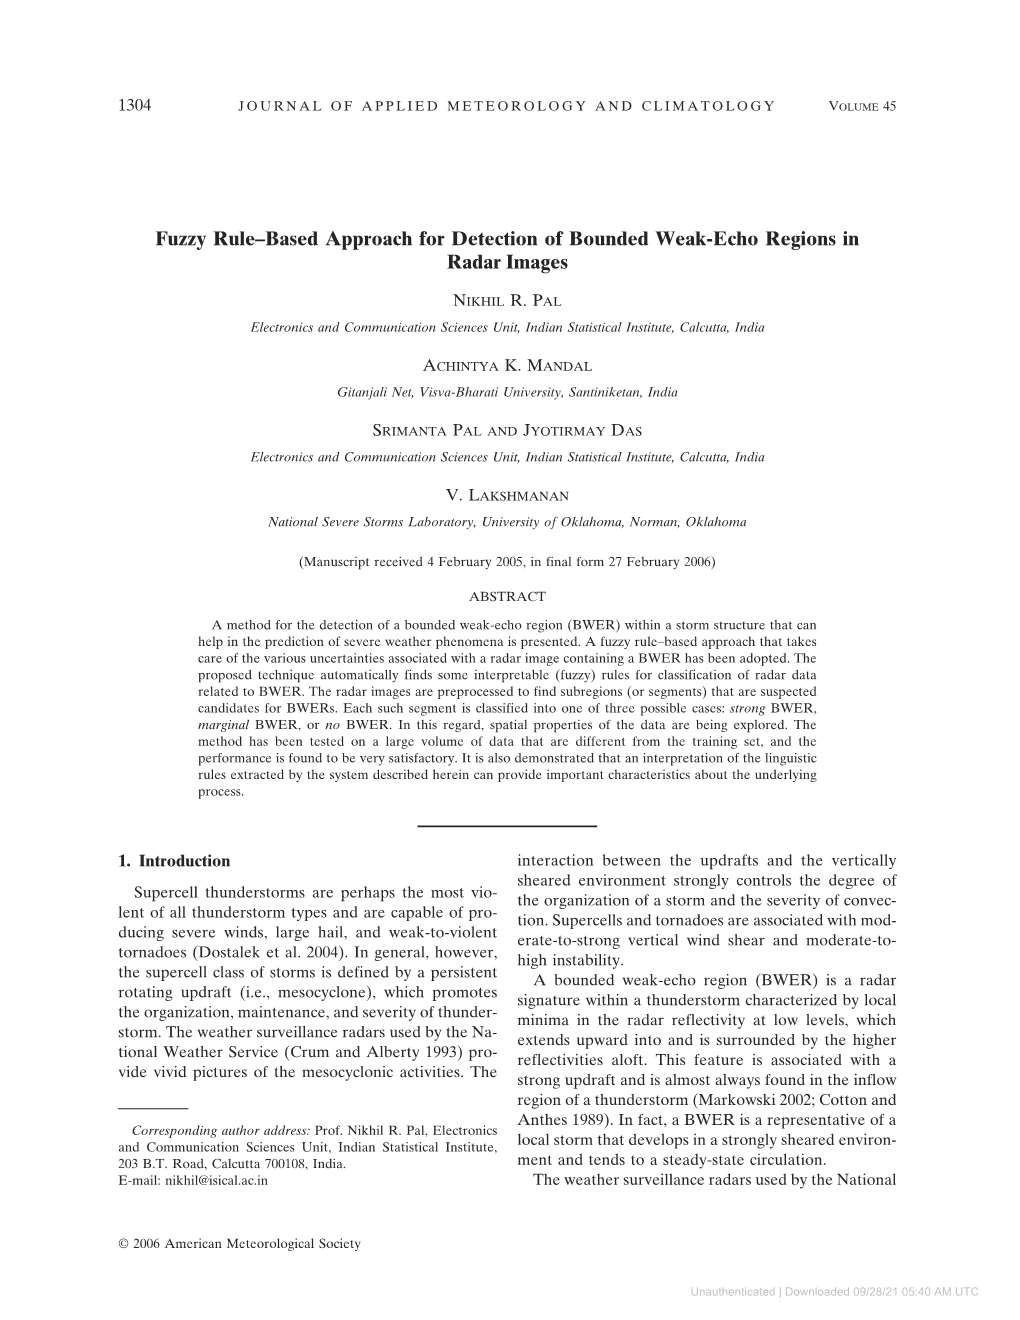 Fuzzy Rule–Based Approach for Detection of Bounded Weak-Echo Regions in Radar Images